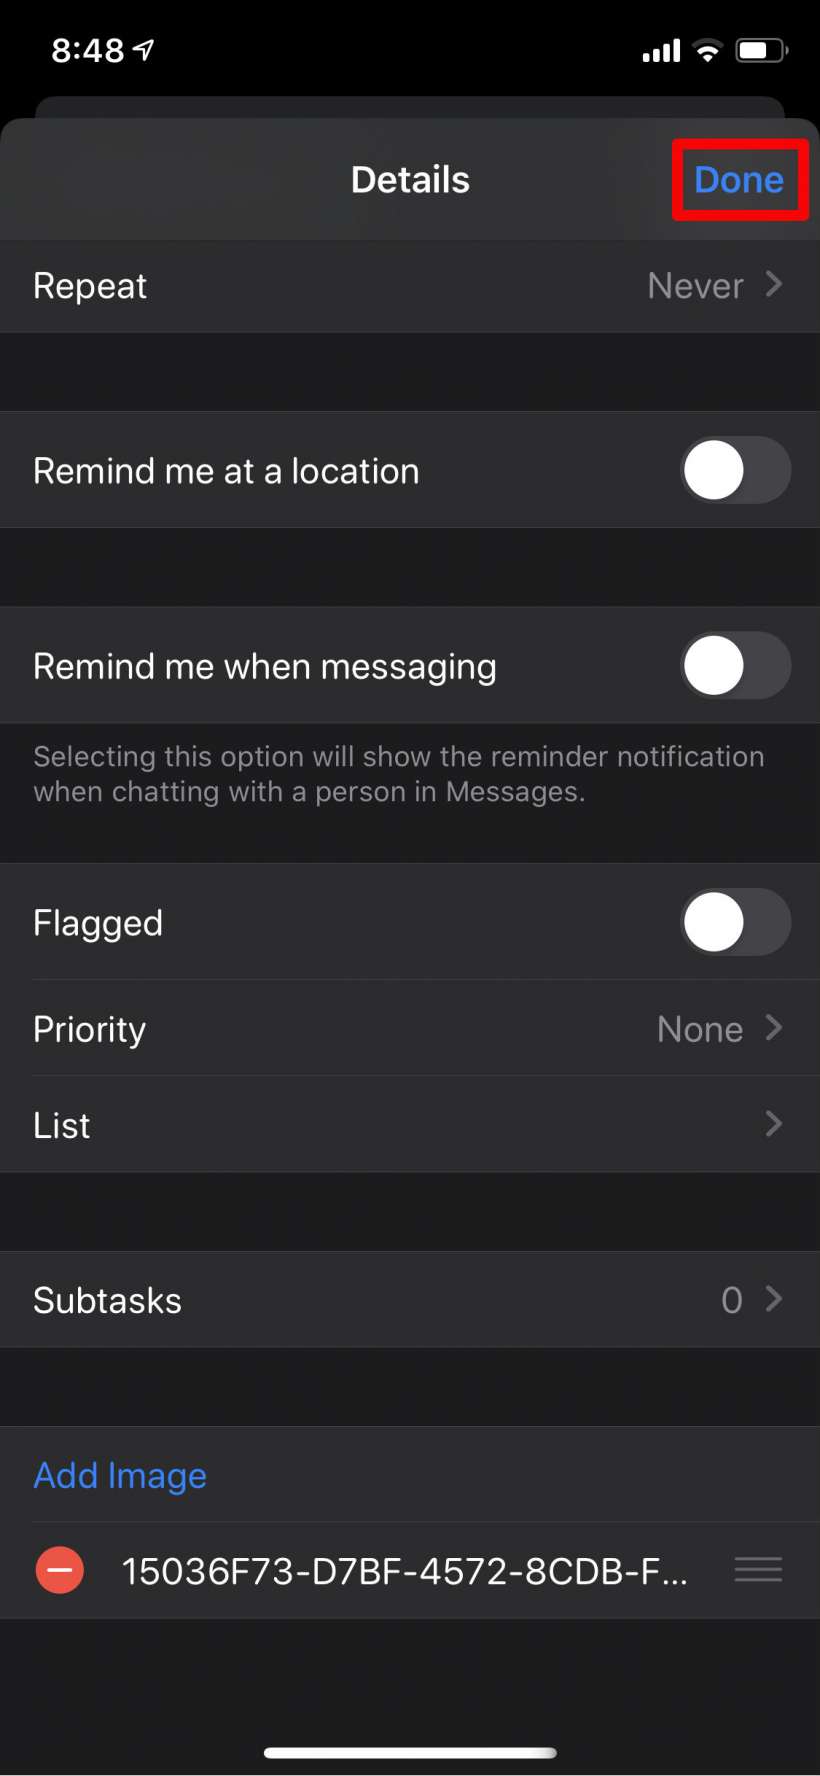 How to put photos and files in your reminders on iPhone and iPad.